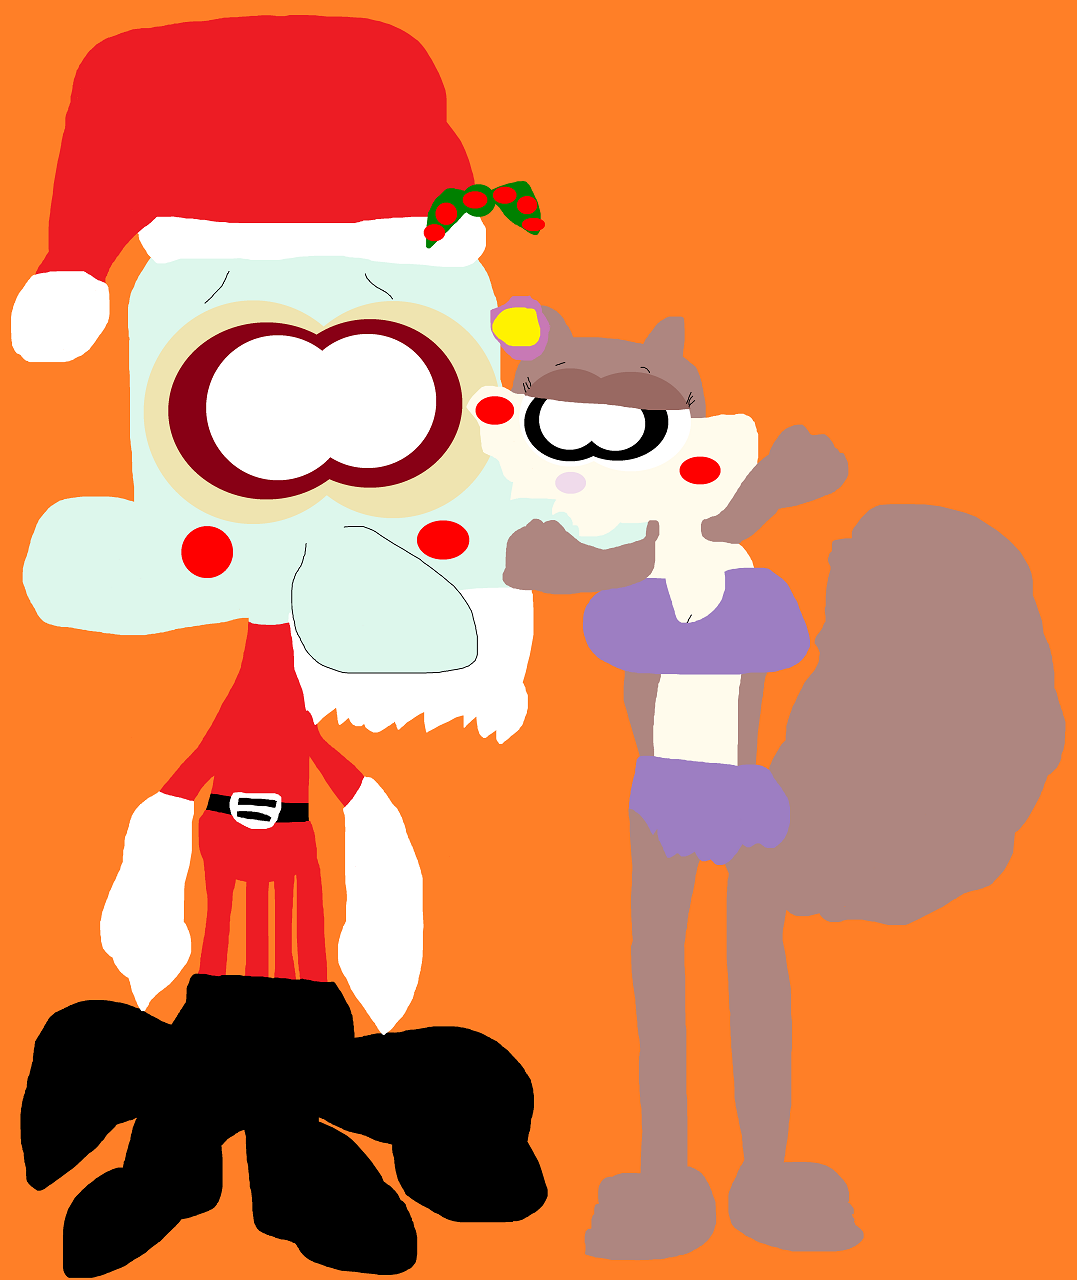 Sandy Kissing Squidward In His Santa Outfit And Mistletoe Hat by Falconlobo